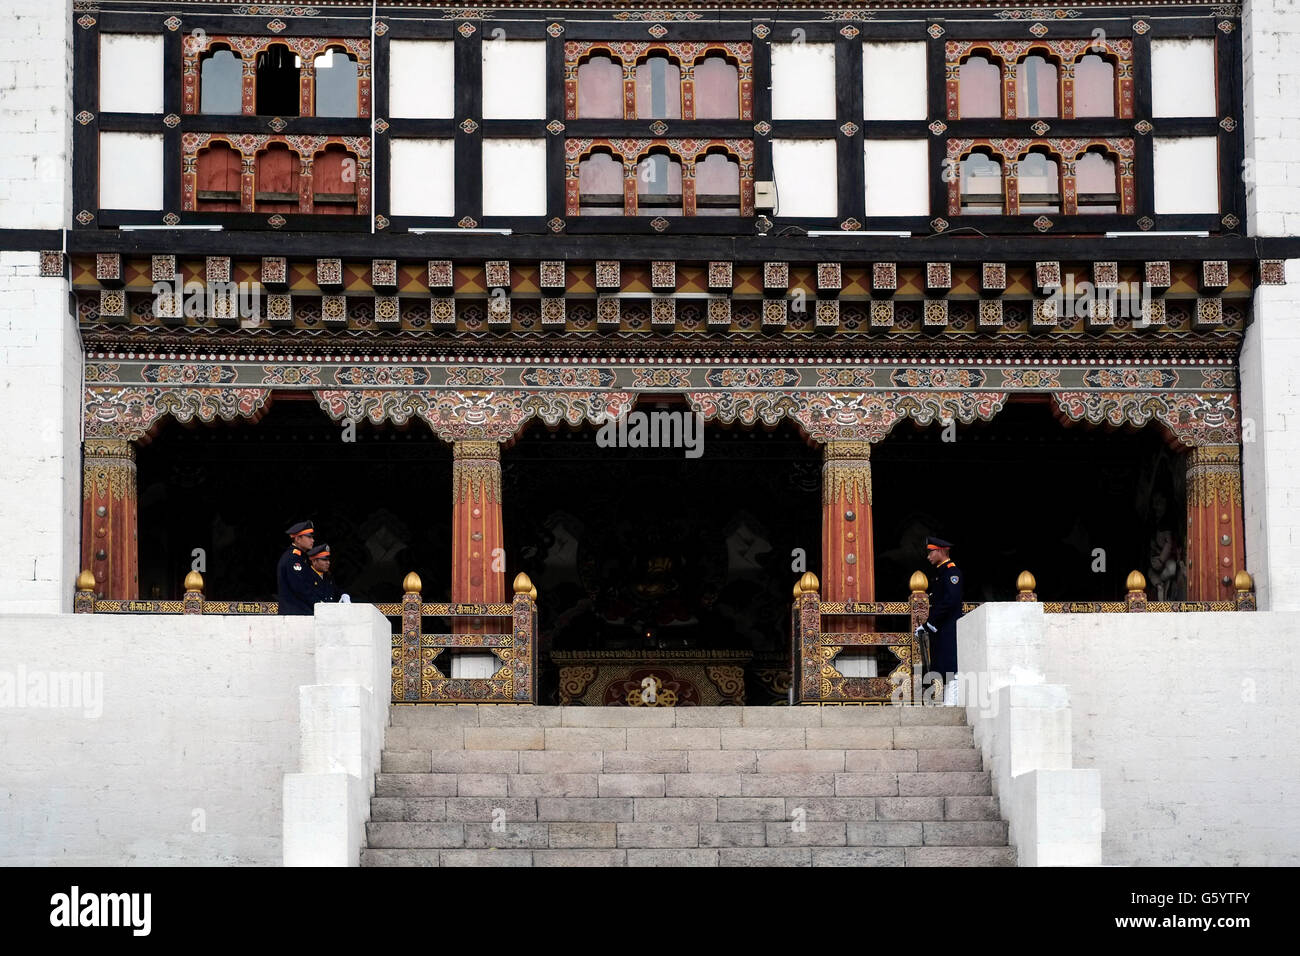 Sentries stand firm at the entrance to the government offices in Tashichho Dzong fortress seat of Bhutan's government since 1952 and presently houses the throne room and offices of the king on the edge of the city of Thimphu the capital of Bhutan Stock Photo